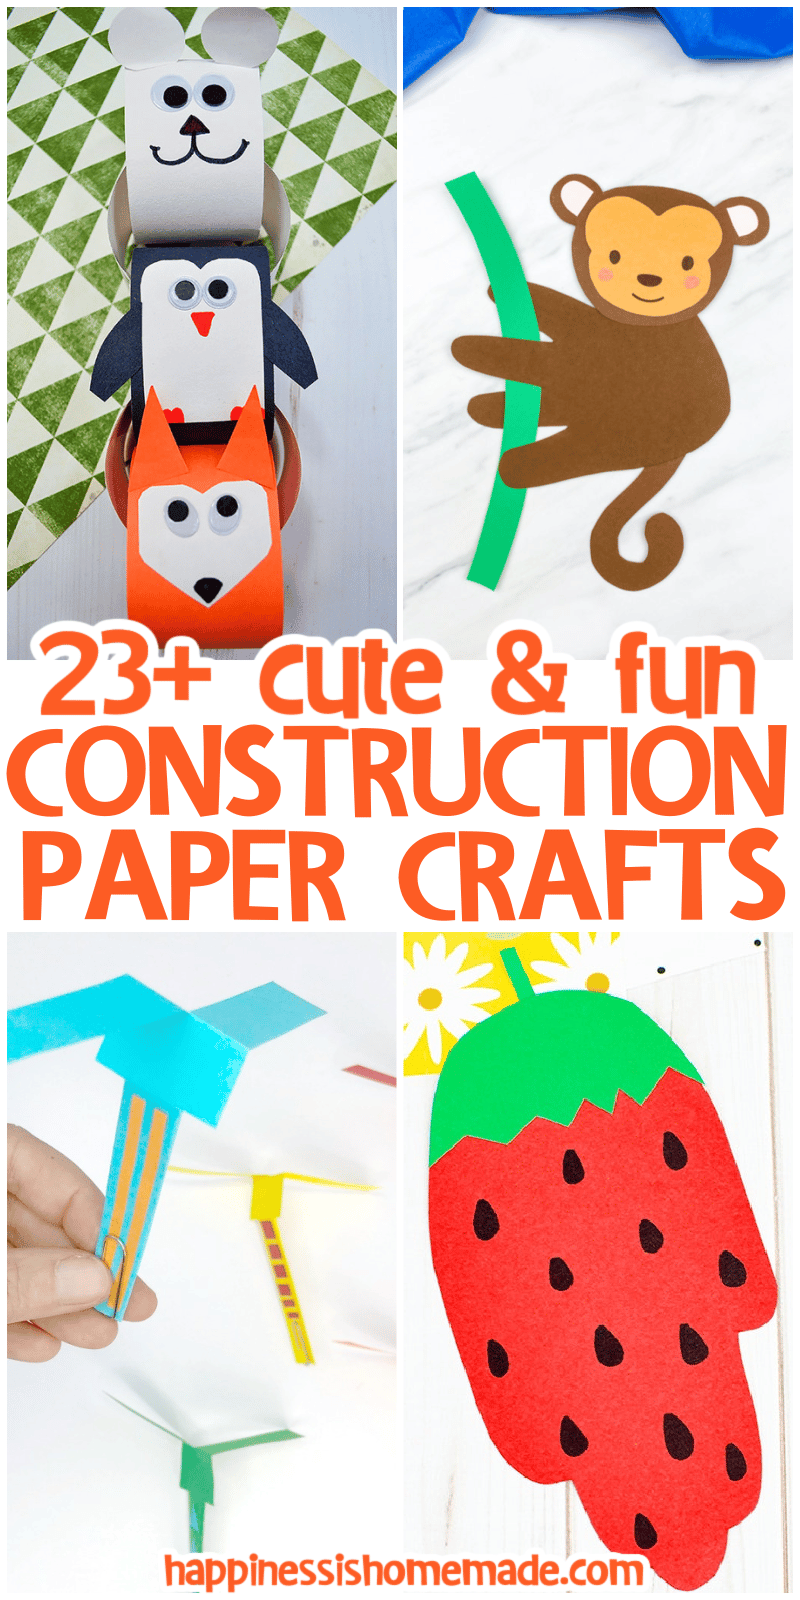 23+ cute and fun construction paper crafts pin graphic